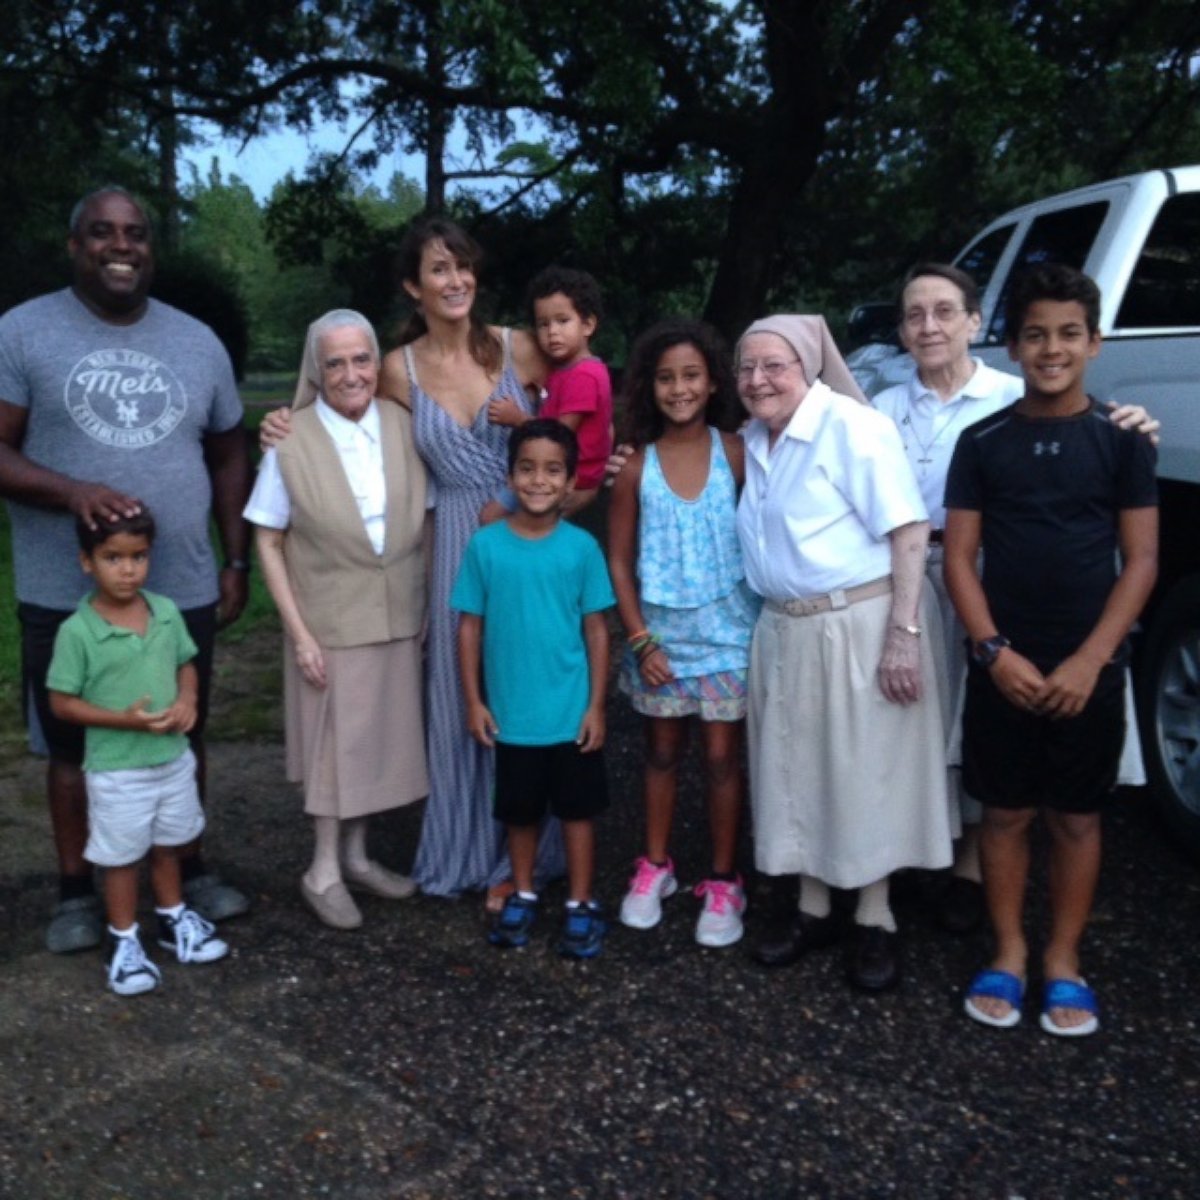 PHOTO: Regina Cates' family photo while staying with nuns in Covington, Louisiana, in Aug. 2016.